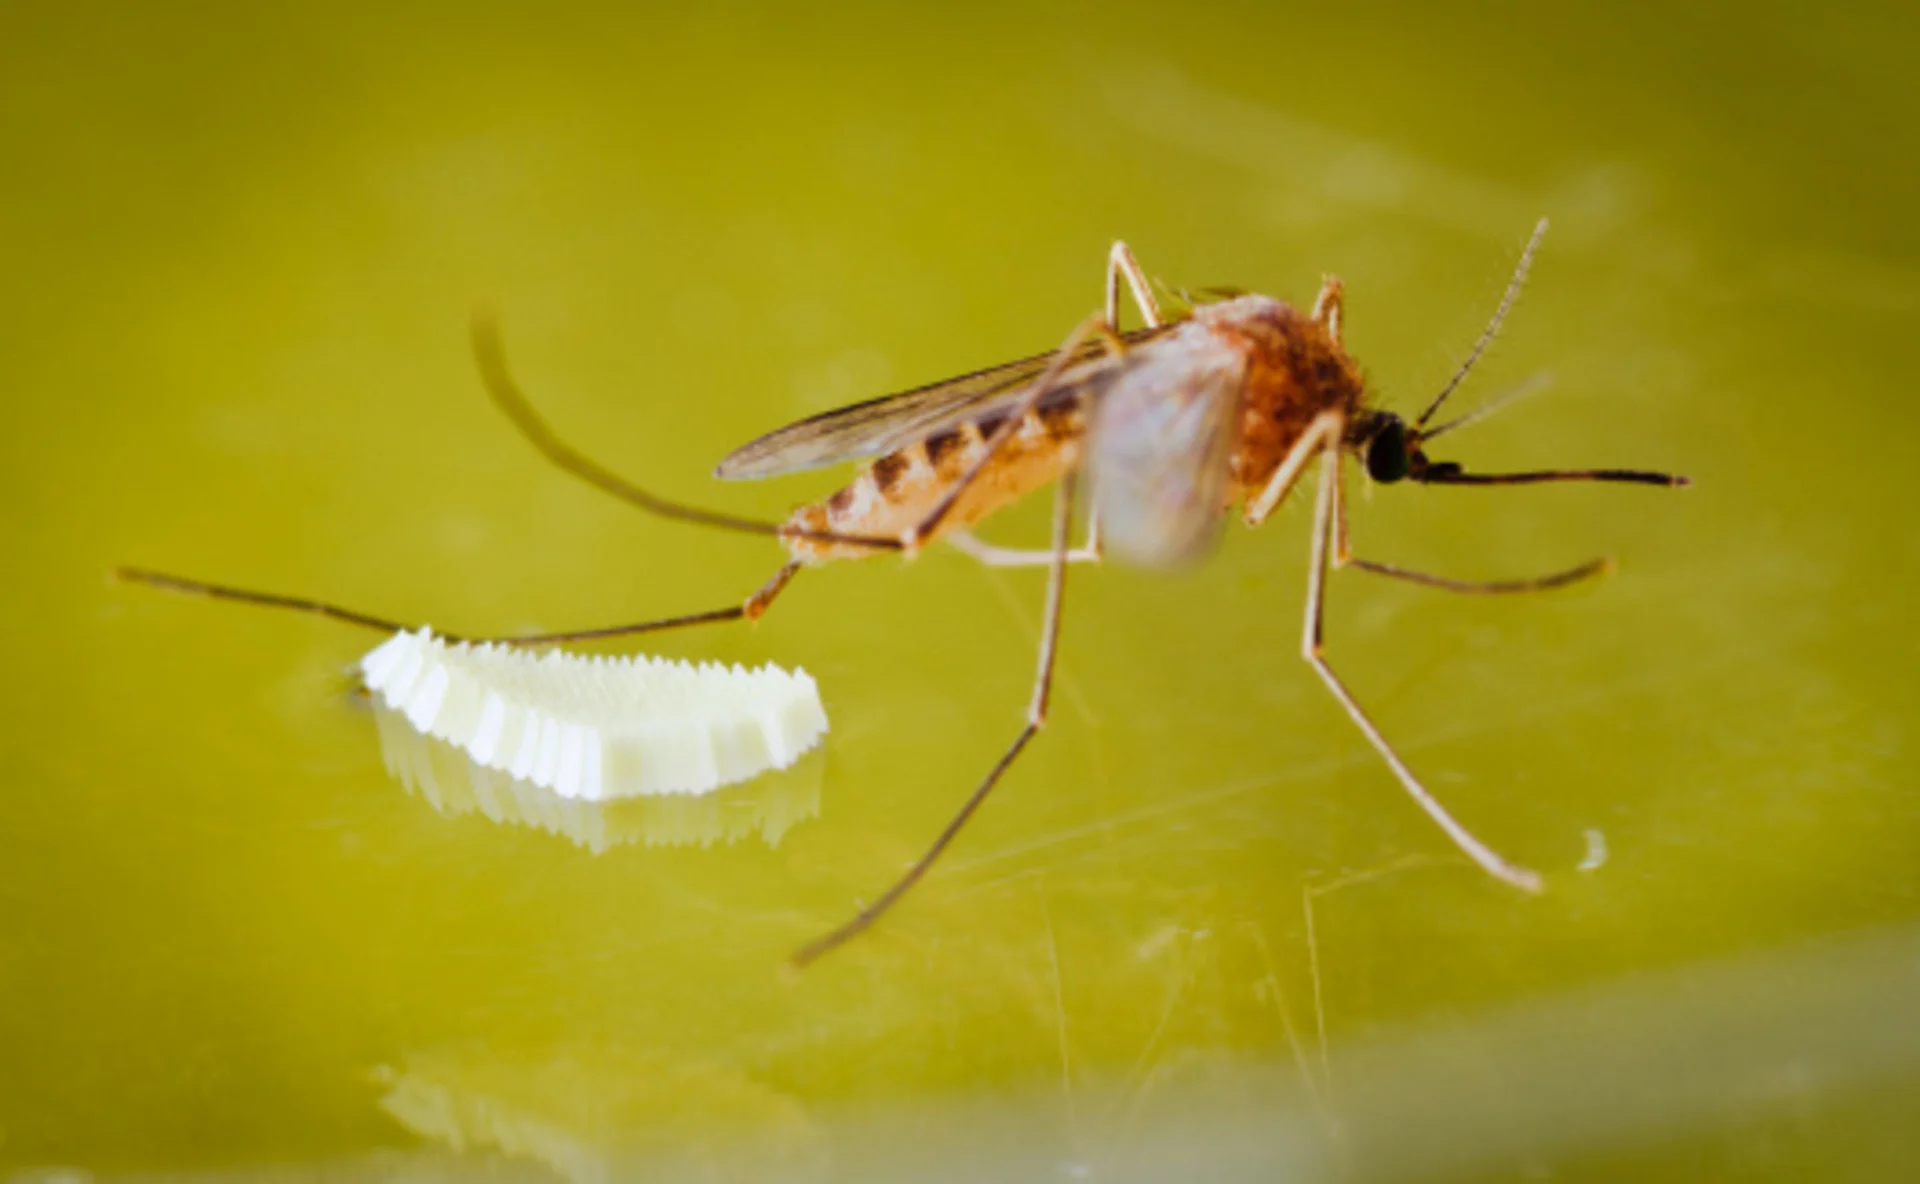 Getty Images: Mosquito and Eggs - stock photo. Credit: doug4537 | Creative #:154925442 License type:	Royalty-free